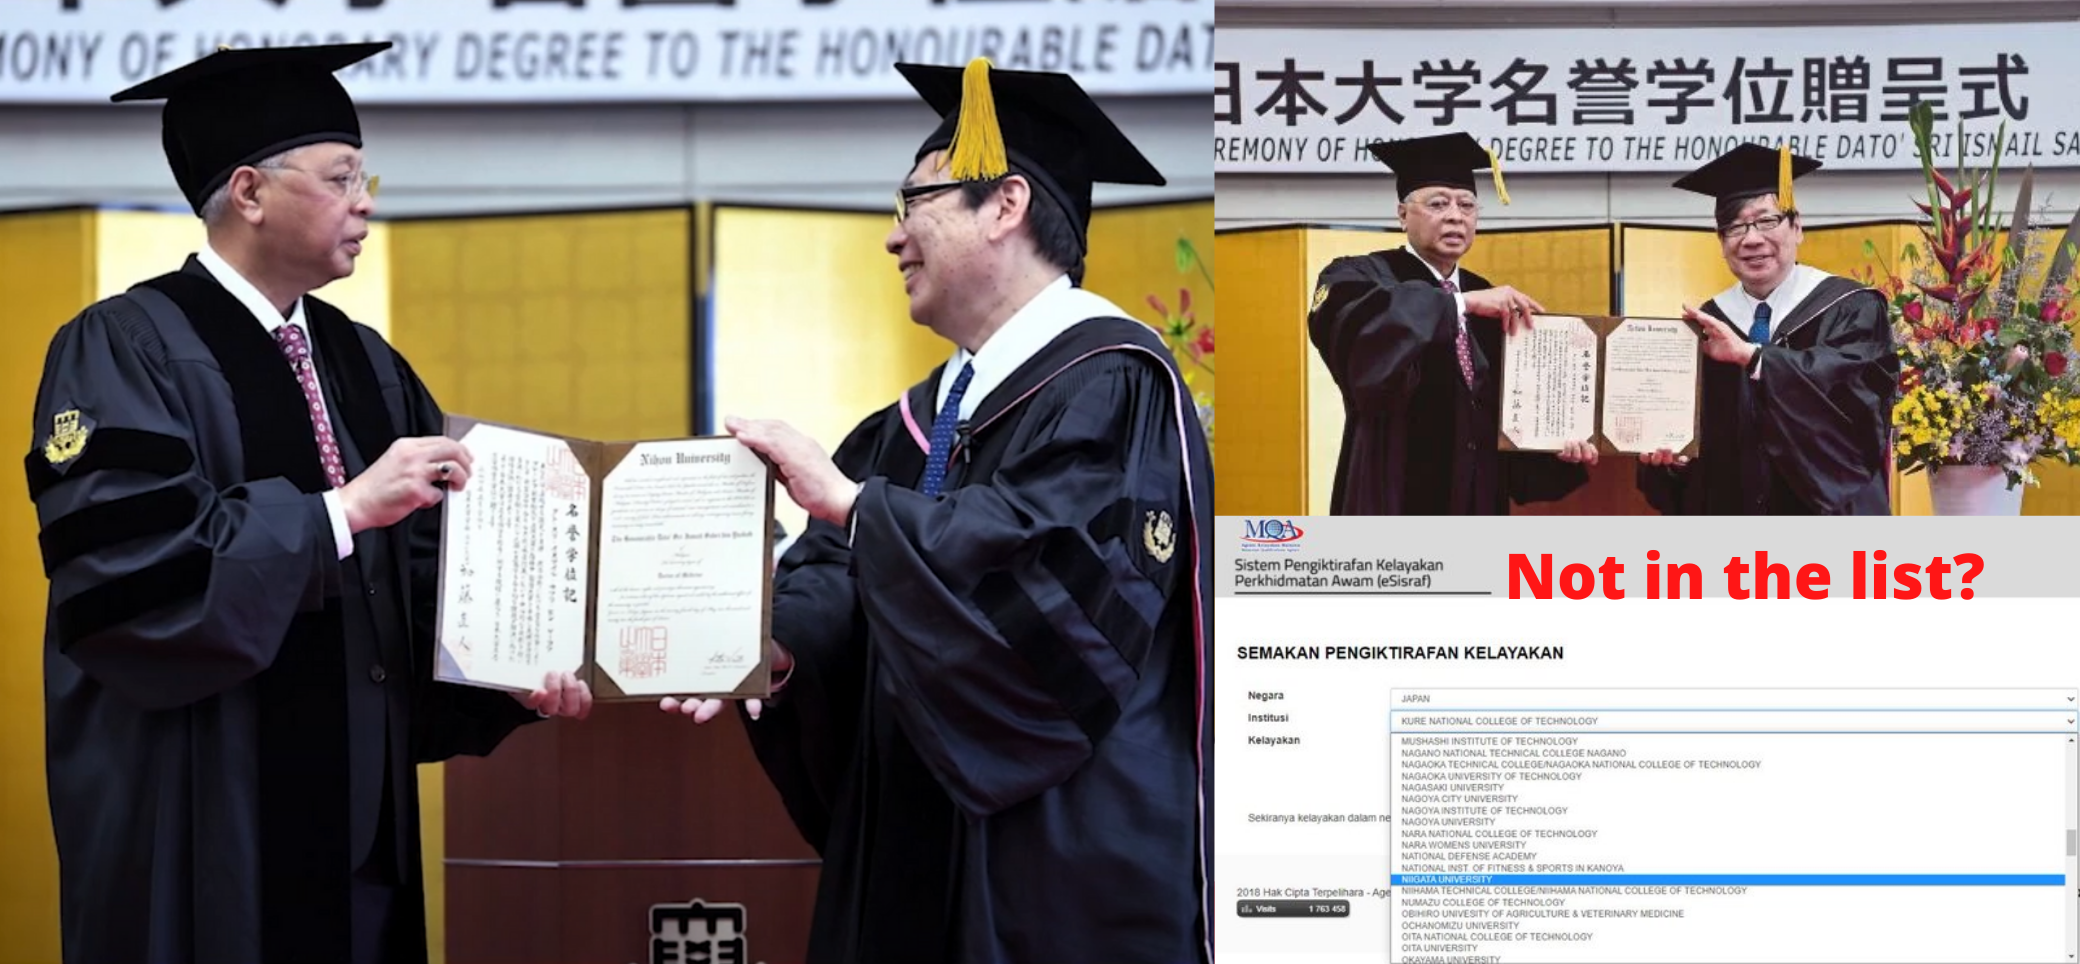 The honorary degree was awarded from Nihon University as part of his contributions to fight against Covid-19.